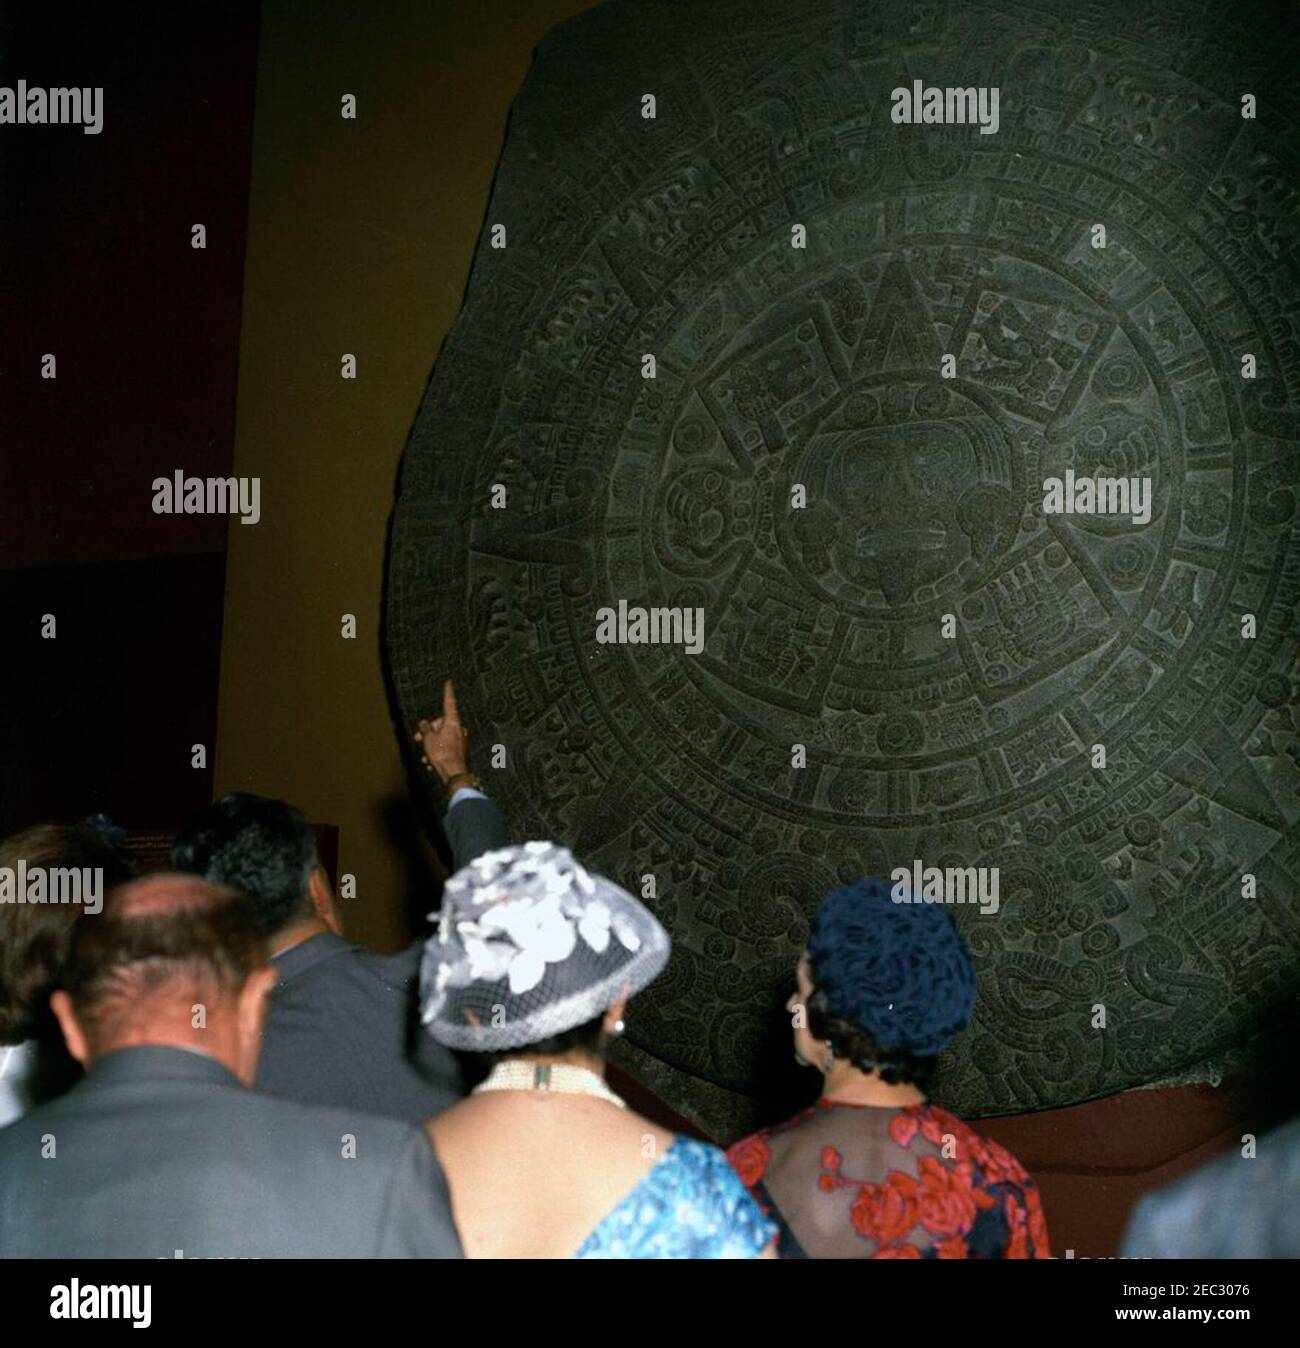 Trip to Mexico: First Lady Jacqueline Kennedy (JBK) visits the National Institute of Anthropology u0026 History. First Lady Jacqueline Kennedy (far left) views the Piedra del Sol (Aztec calendar, Sun Stone) during a tour of the Museo Nacional de Antropologu00eda (National Museum of Anthropology) of the Instituto Nacional de Antropologu00eda e Historia (National Institute of Anthropology and History) in Mexico City, Mexico. Also pictured: Eva Lu00f3pez Mateos; First Lady of Mexico, Eva Su00e1mano de Lu00f3pez Mateos. Stock Photo